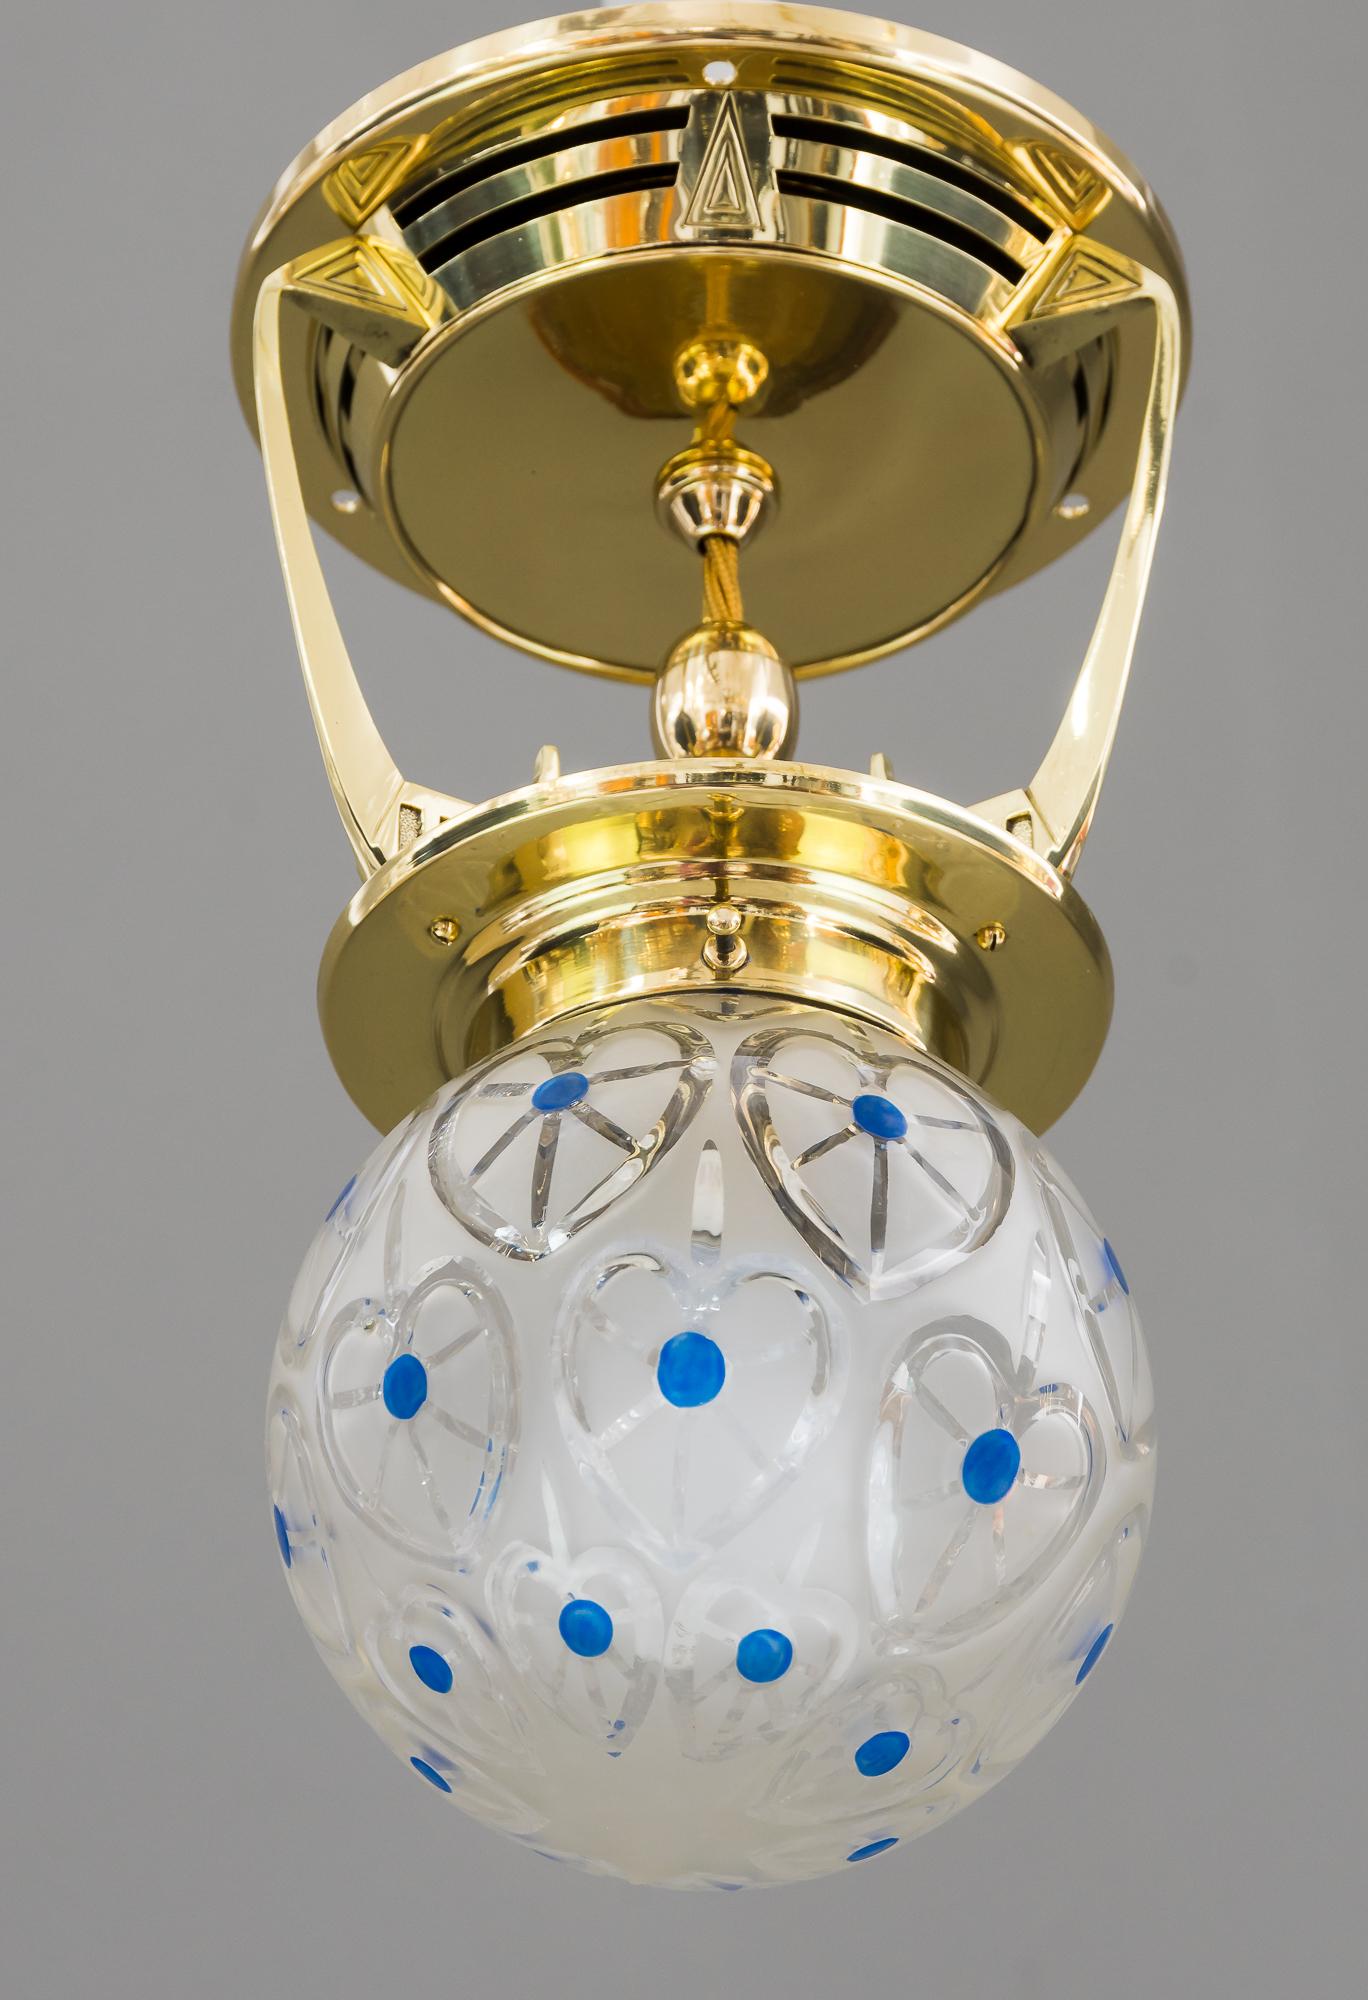 Art Deco ceiling lamp, Vienna, circa 1920s
Polished and stove enameled
Glass blue dots painted.